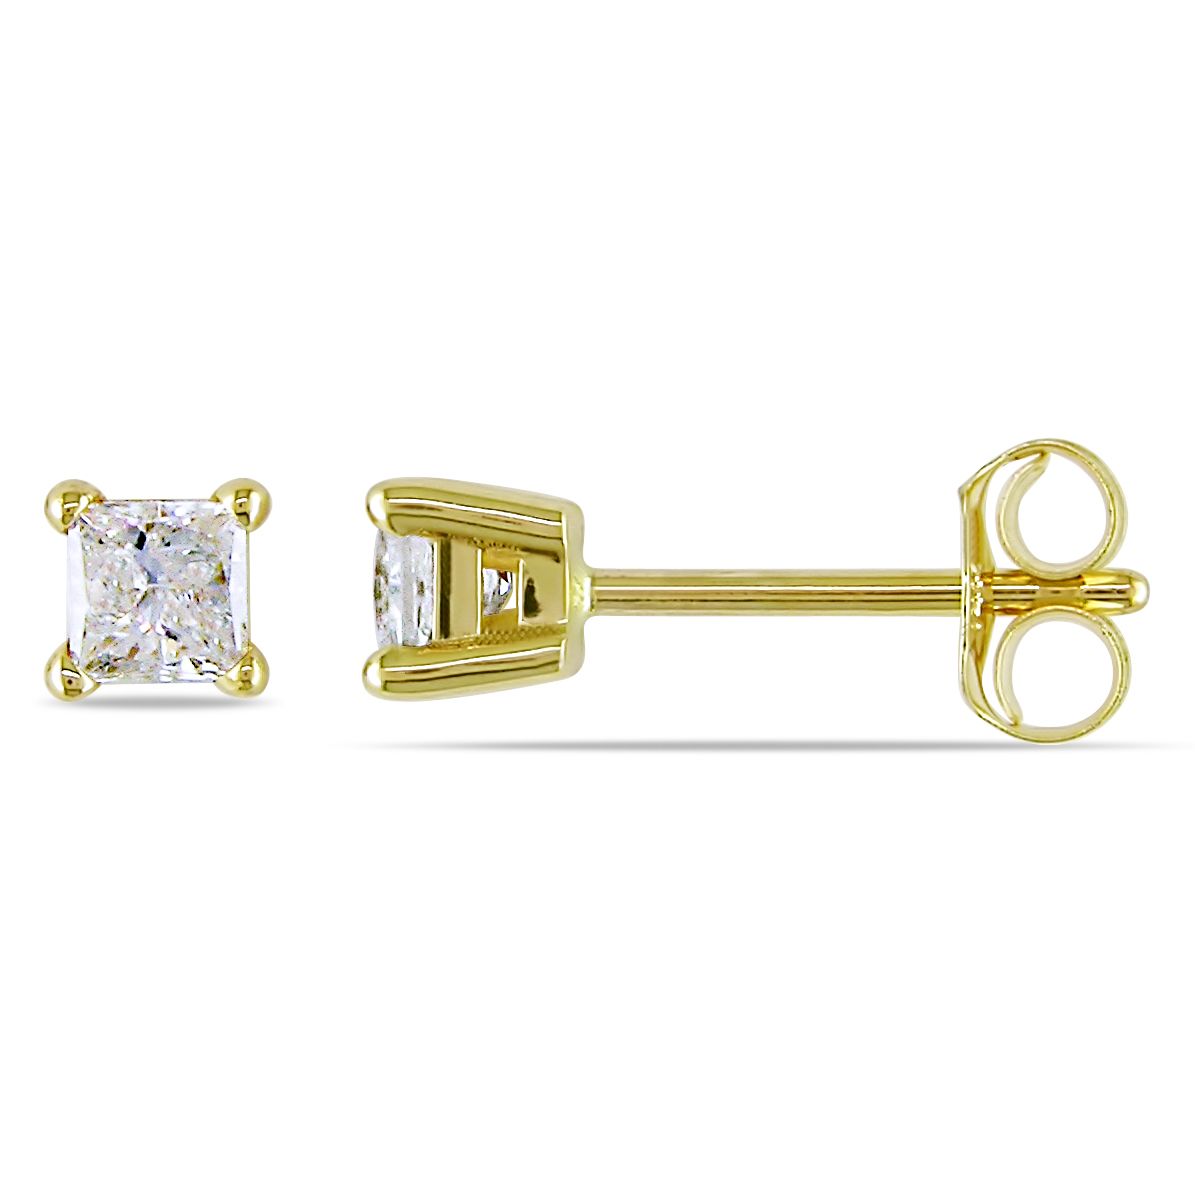 1/3 CT Princess Cut Solitaire Earrings Set in 14K Yellow Gold (J-K I2-I3)